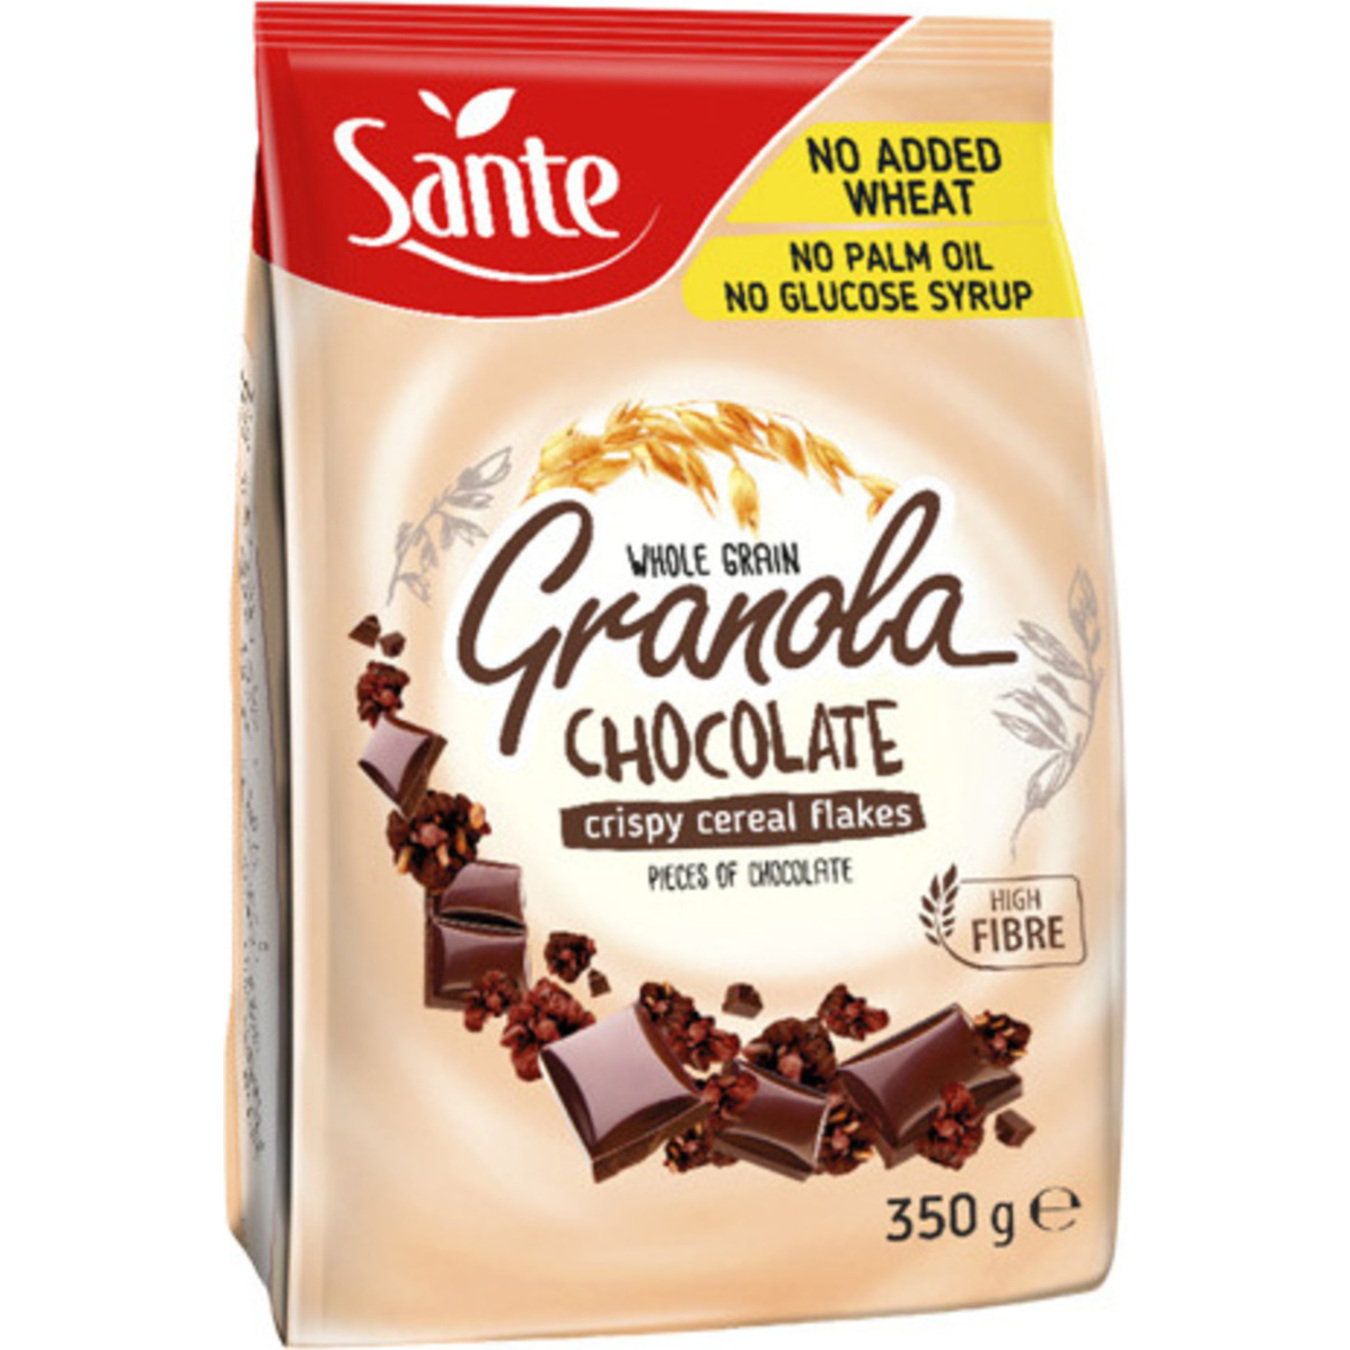 Sante Granola Whole Grain Crispy Cereal Flakes with pieces of chocolate 350g